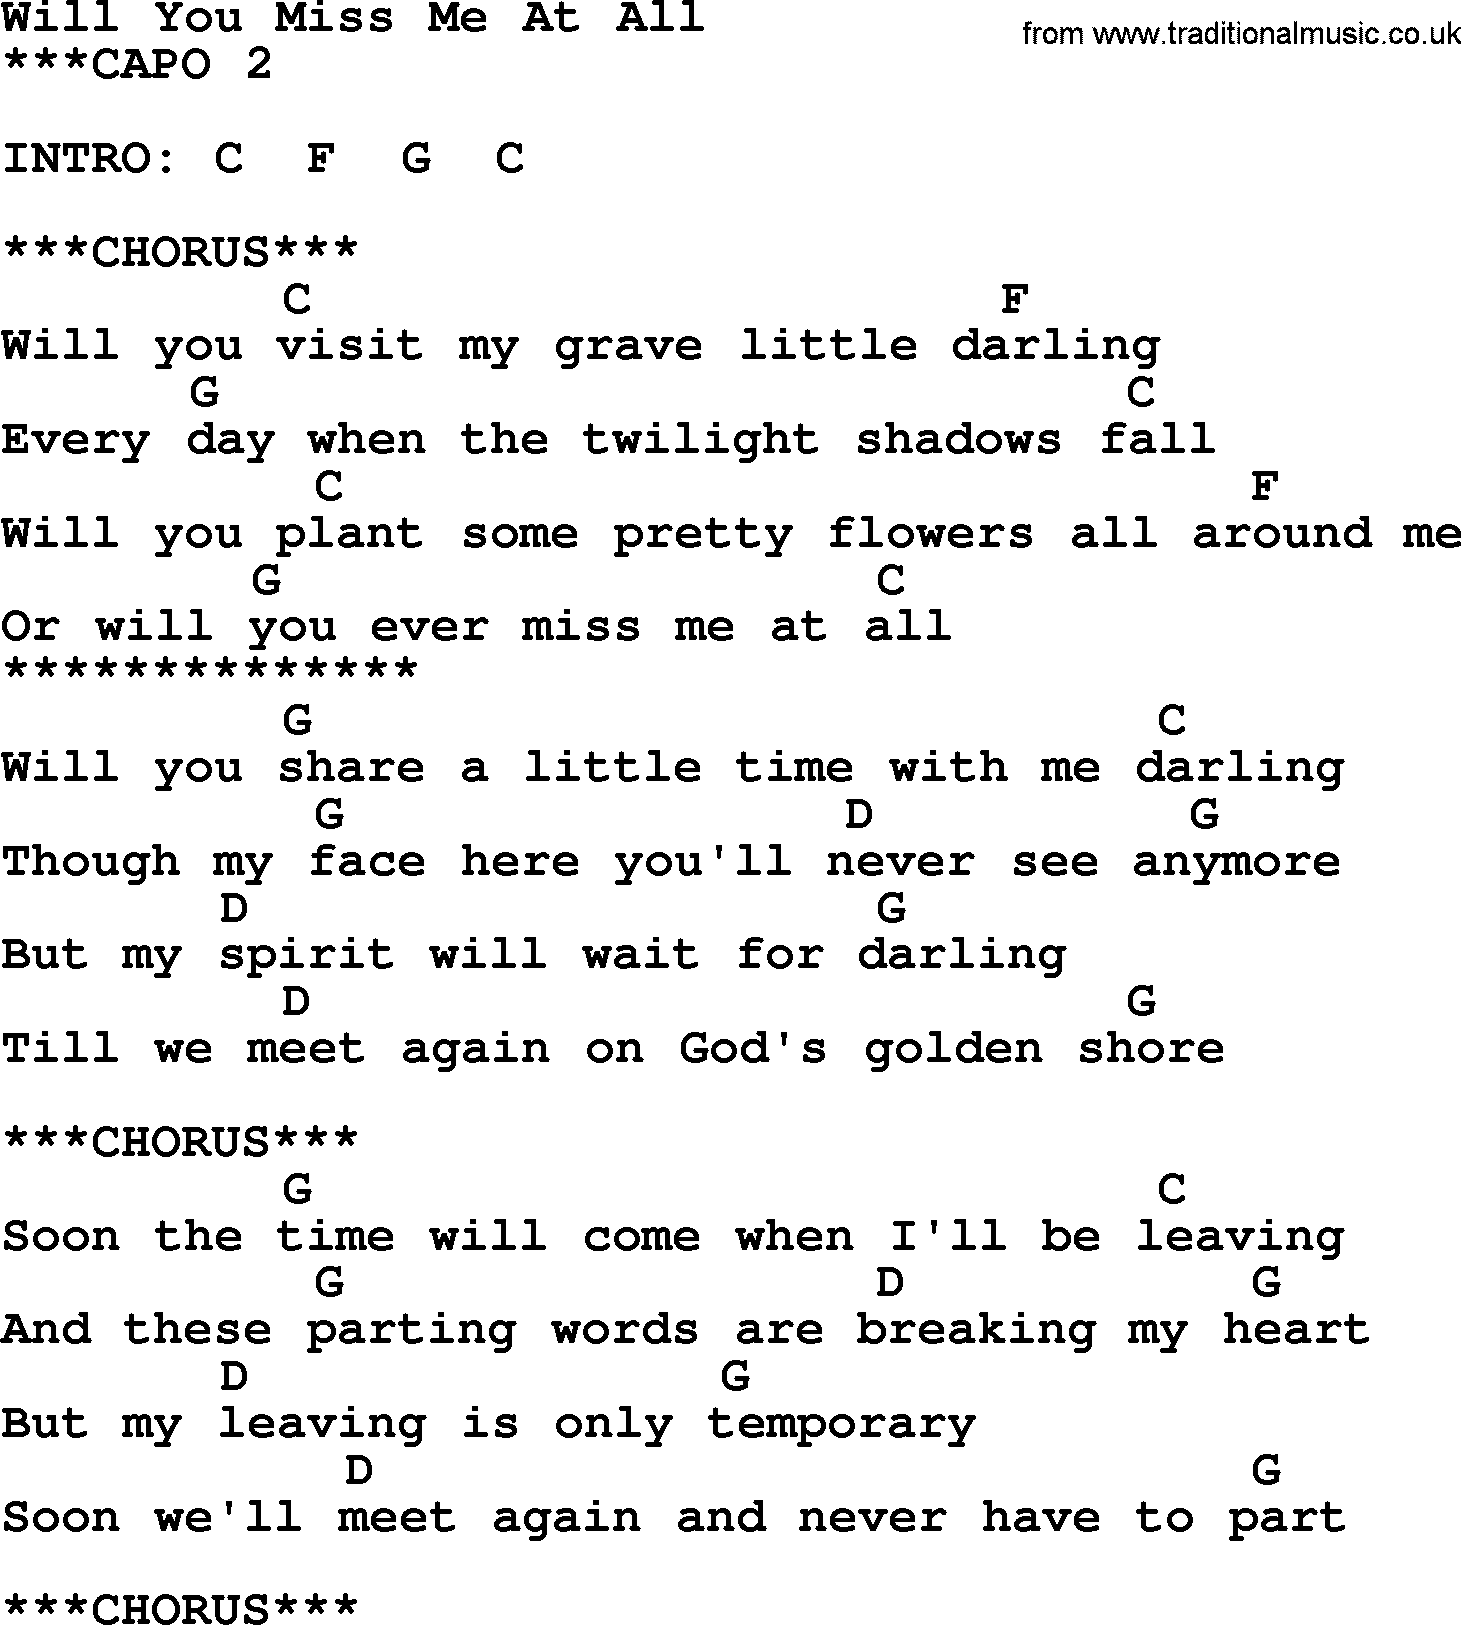 Bluegrass song: Will You Miss Me At All, lyrics and chords